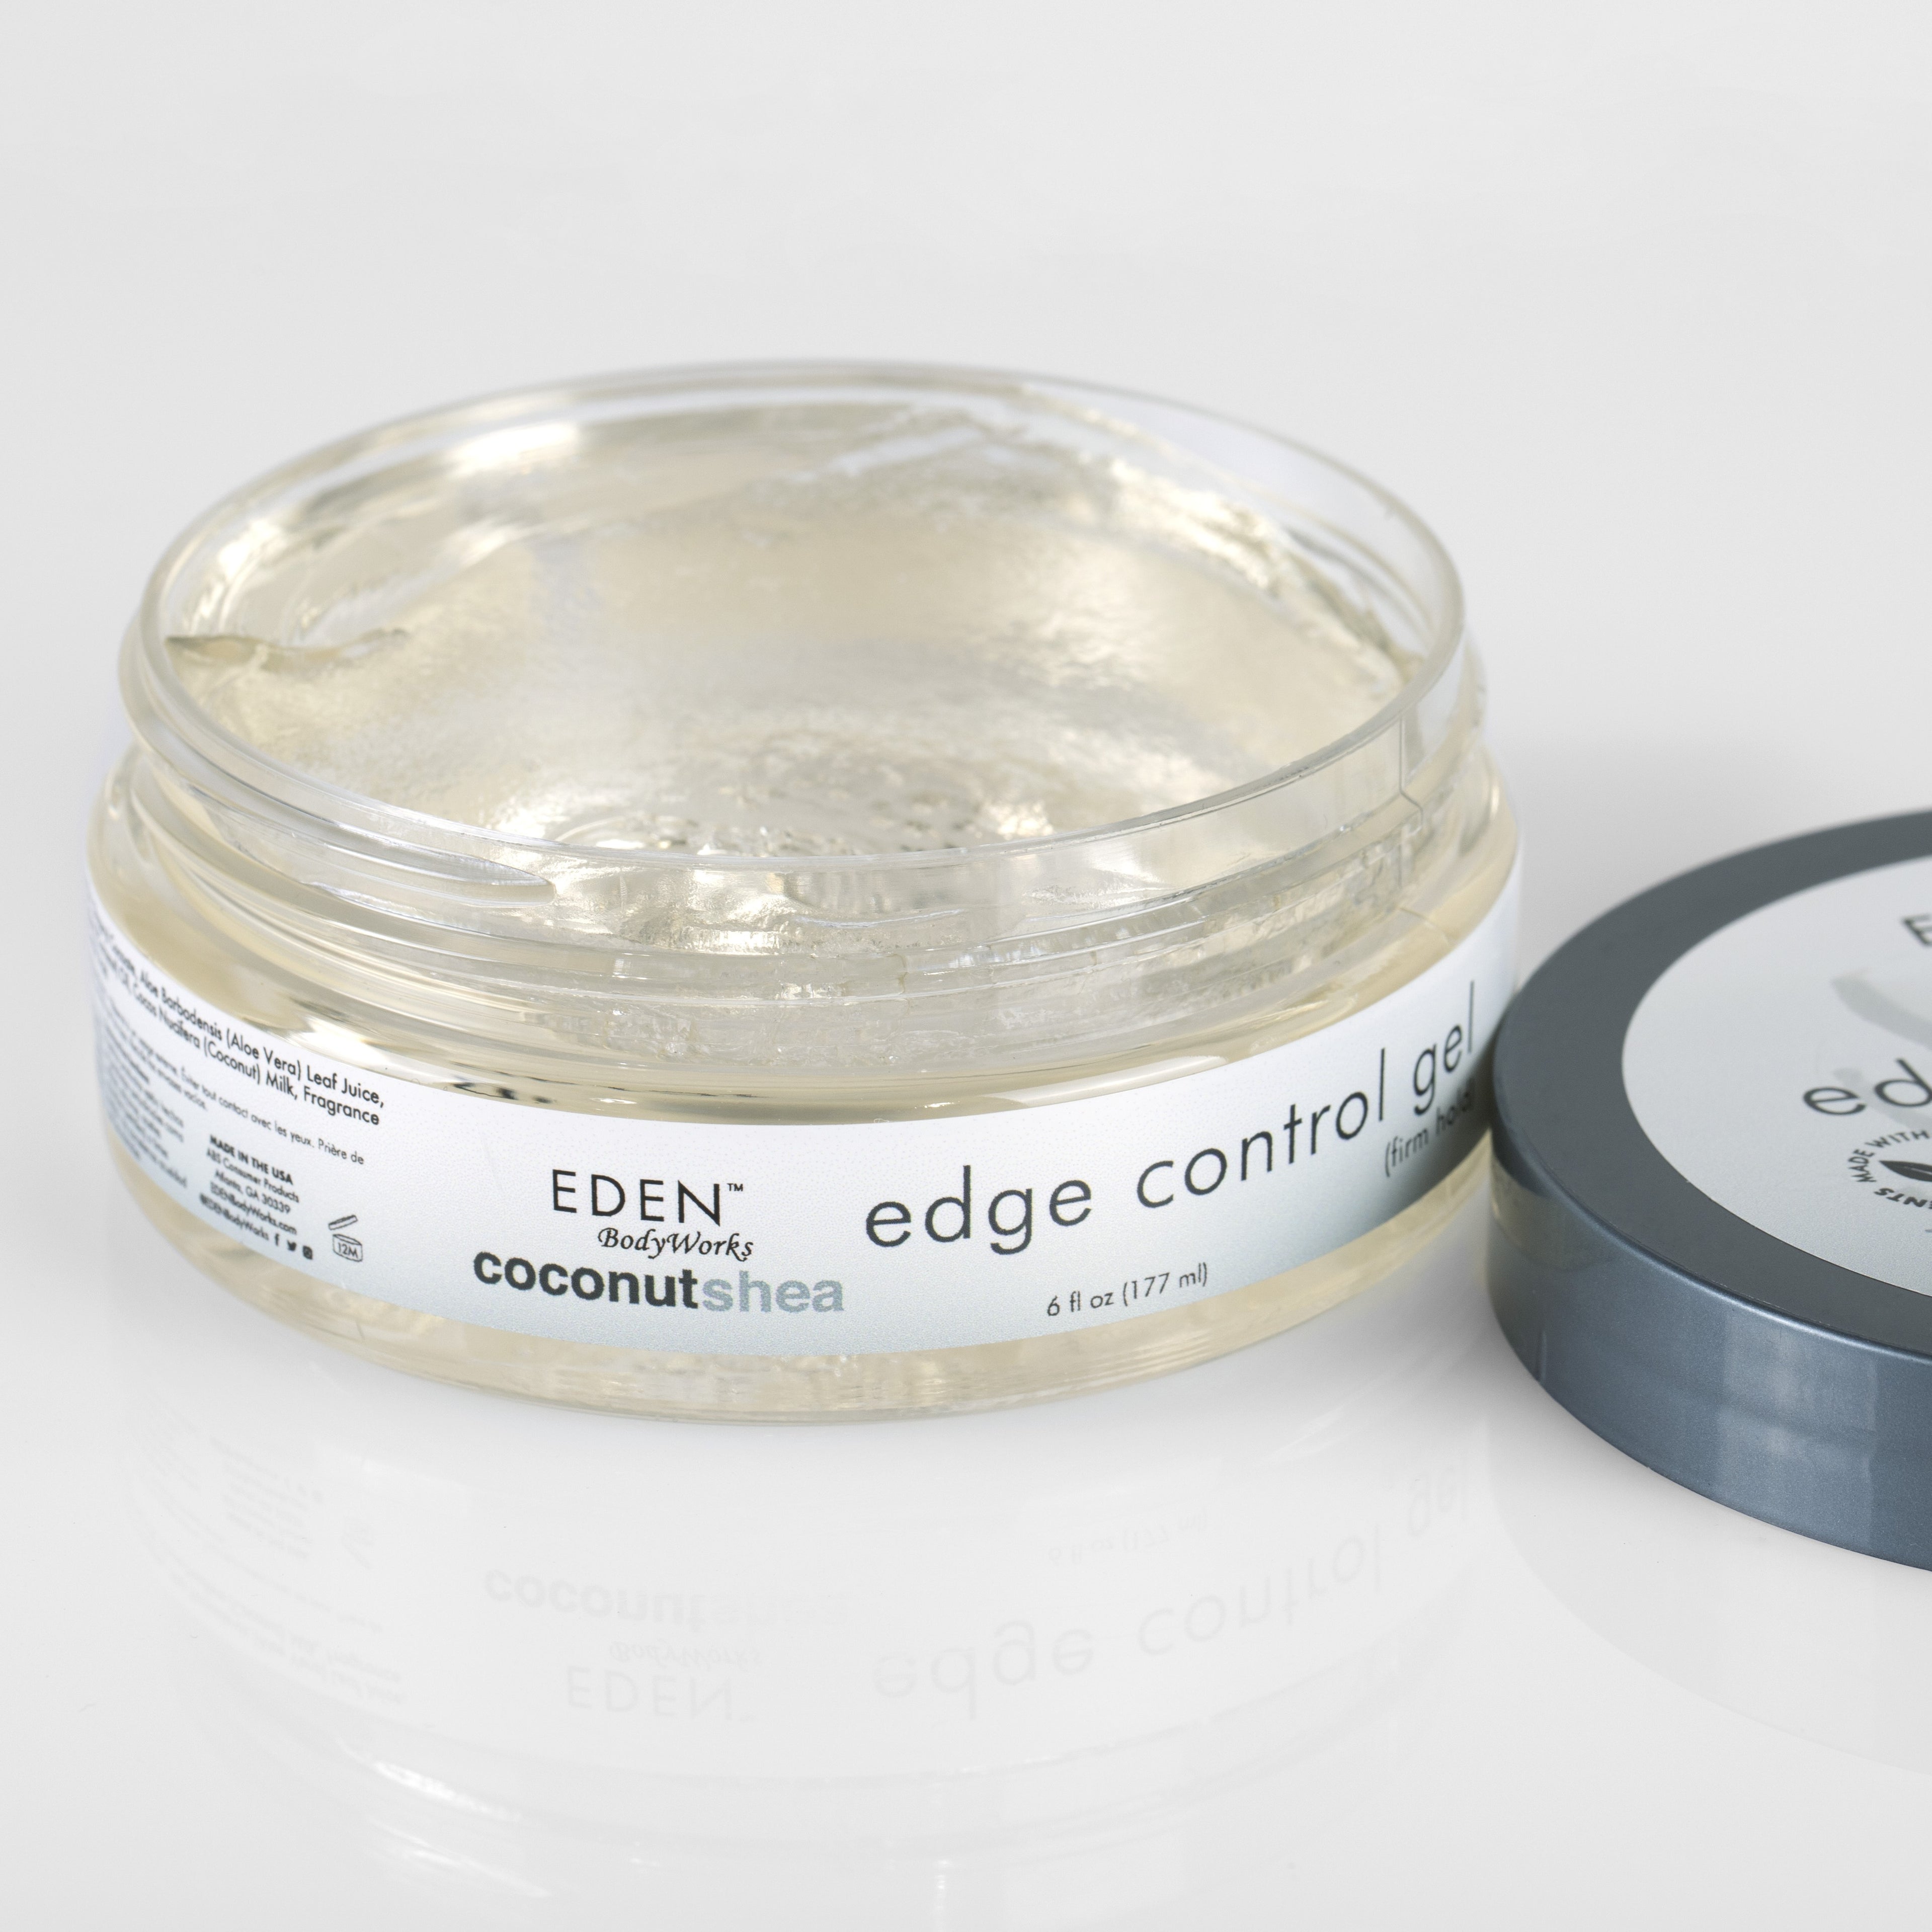 EZEDGES Edge Control Gel with Coconut & Shae butter - Canada wide